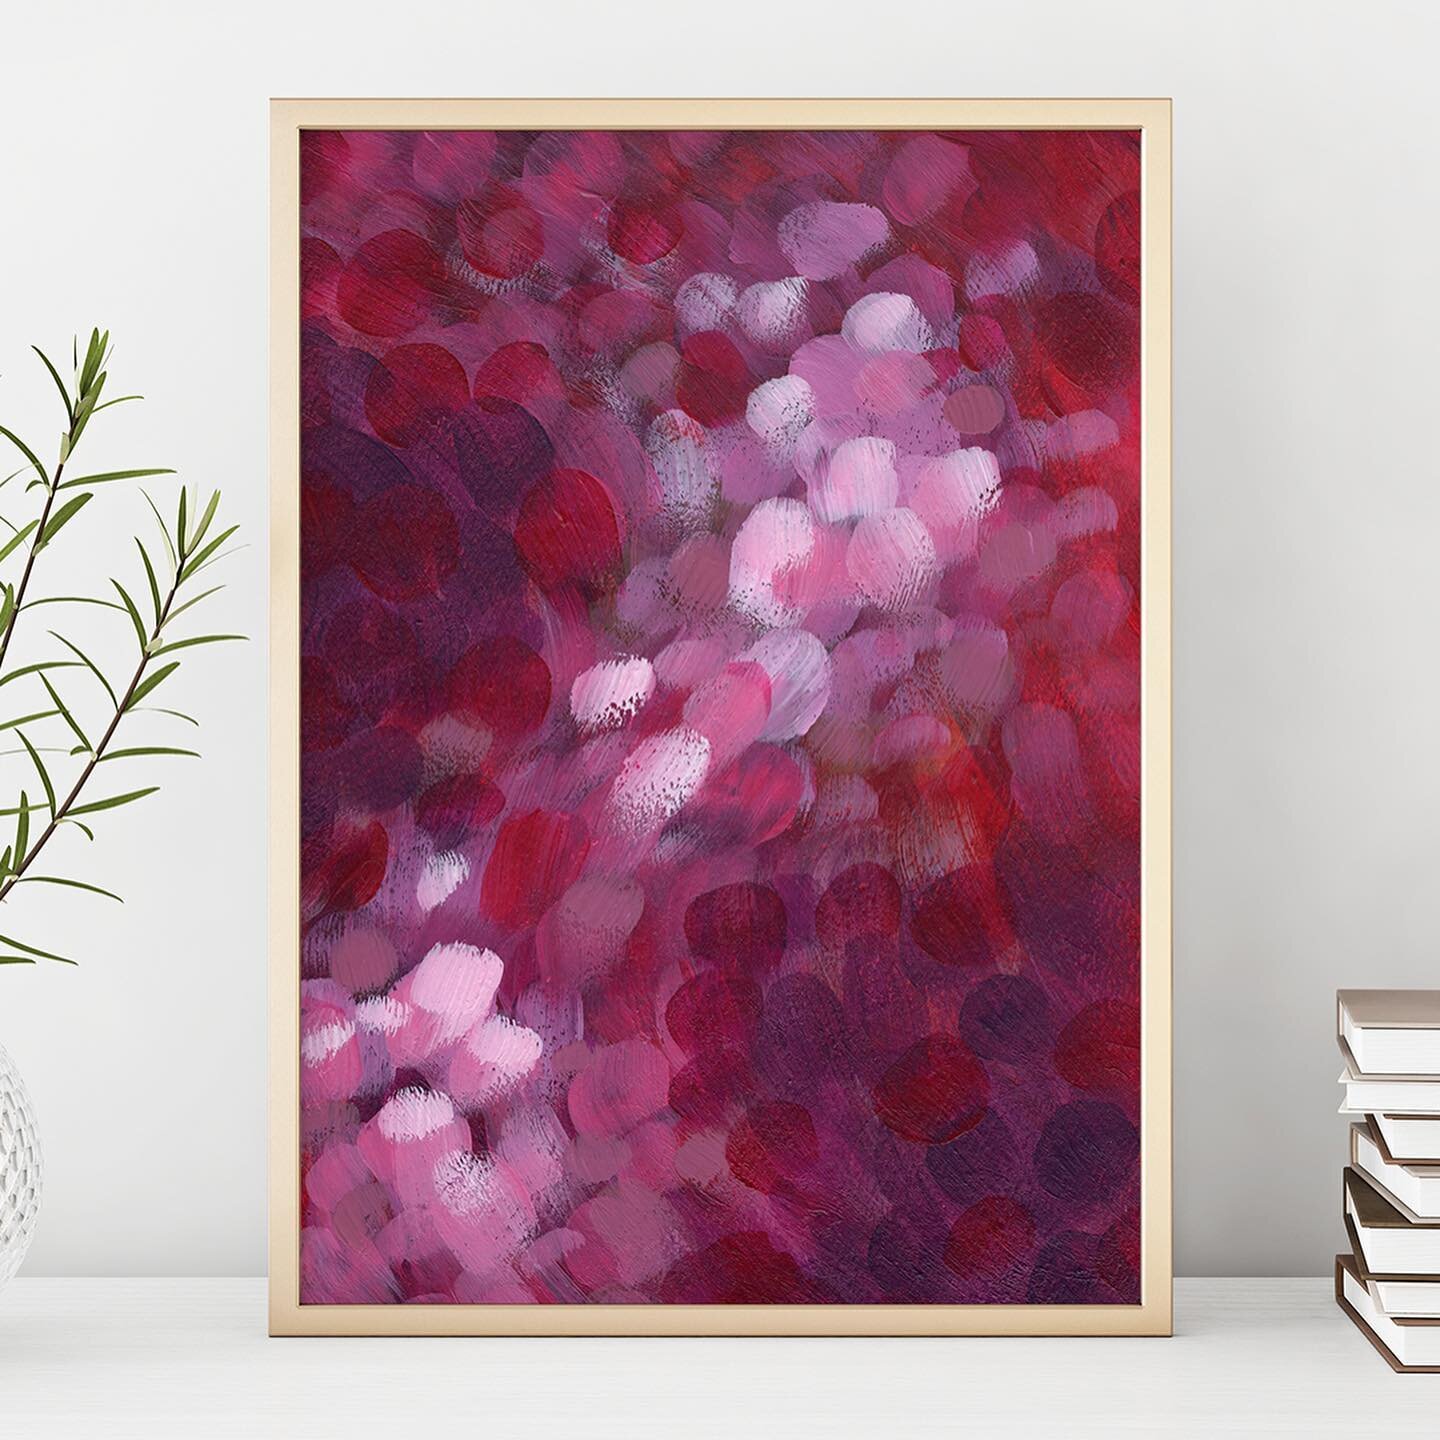 NEW ART &ndash; You heard it here first. I made something new. This moody burgundy piece was something I created over a few weeks. Whenever I had a free 10 minutes (and was inspired) I&rsquo;d add layers of acrylic paint onto thick watercolor paper. 